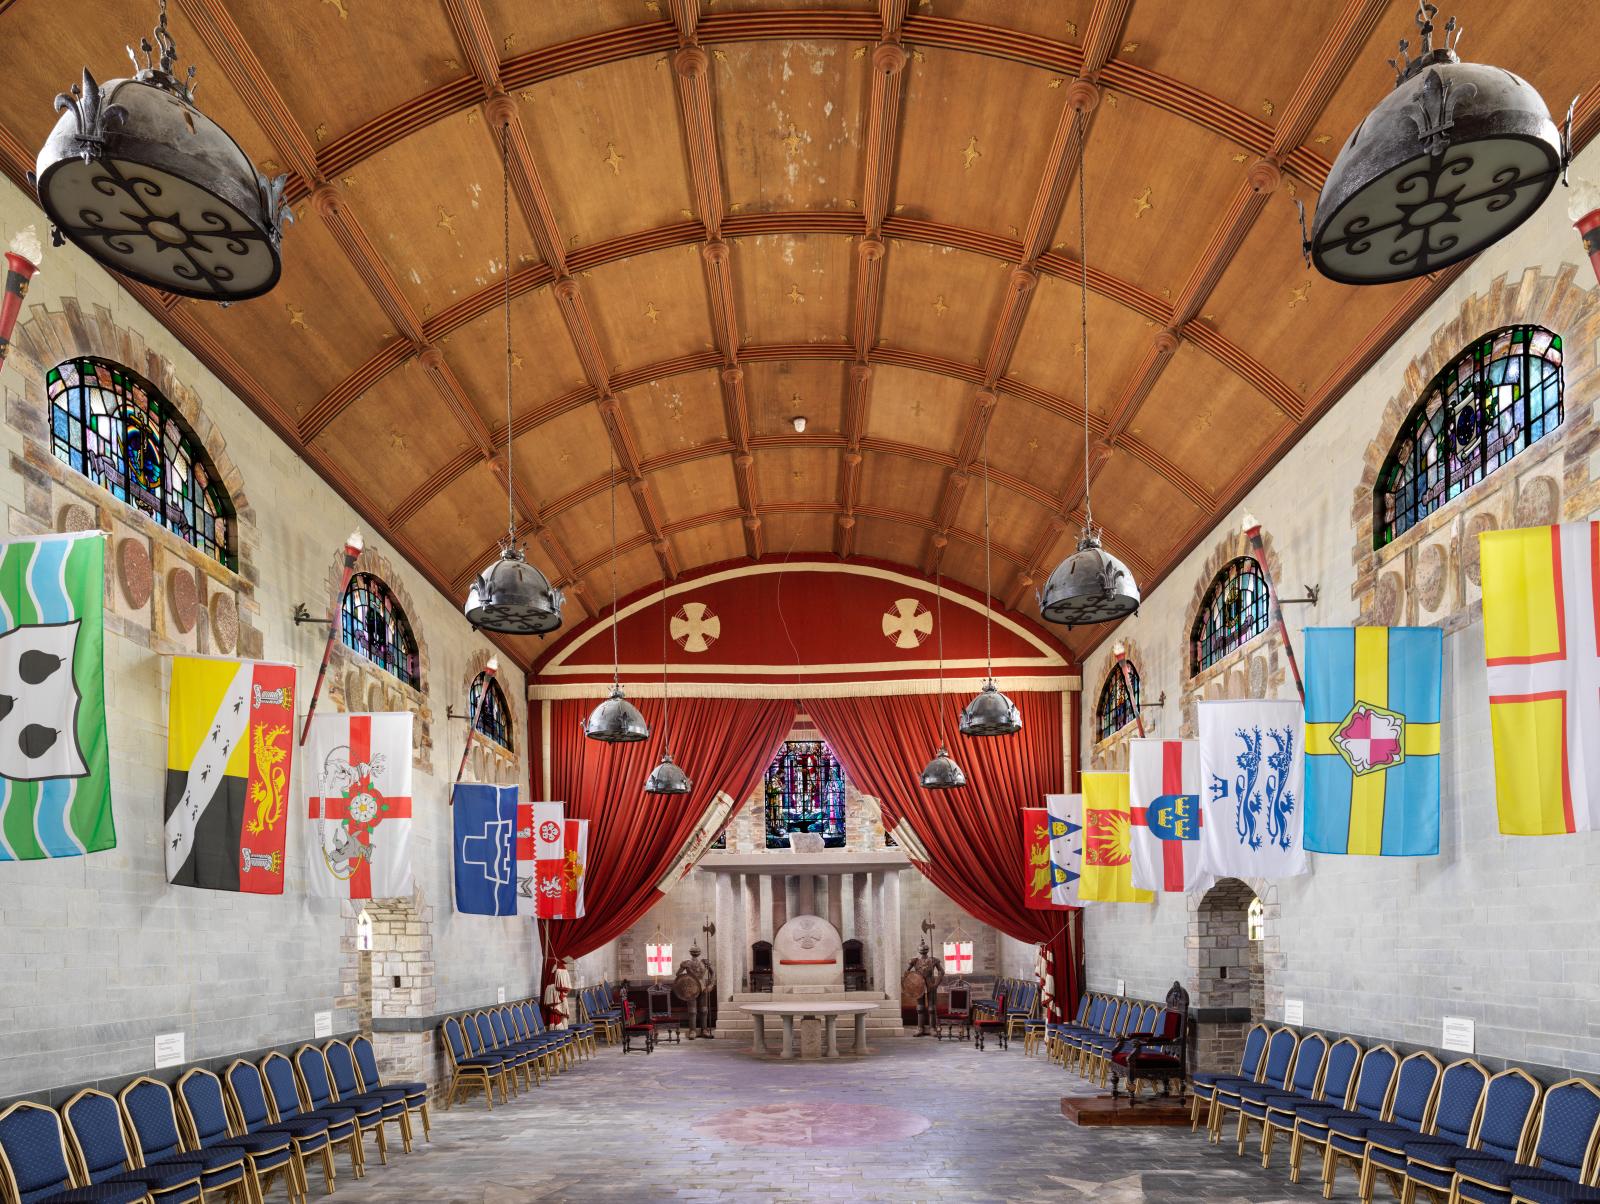 A large hall space with stone walls and a wooden barrel-vaulted ceiling. Stained glass windows and hung banners and curtains add colour to the space.